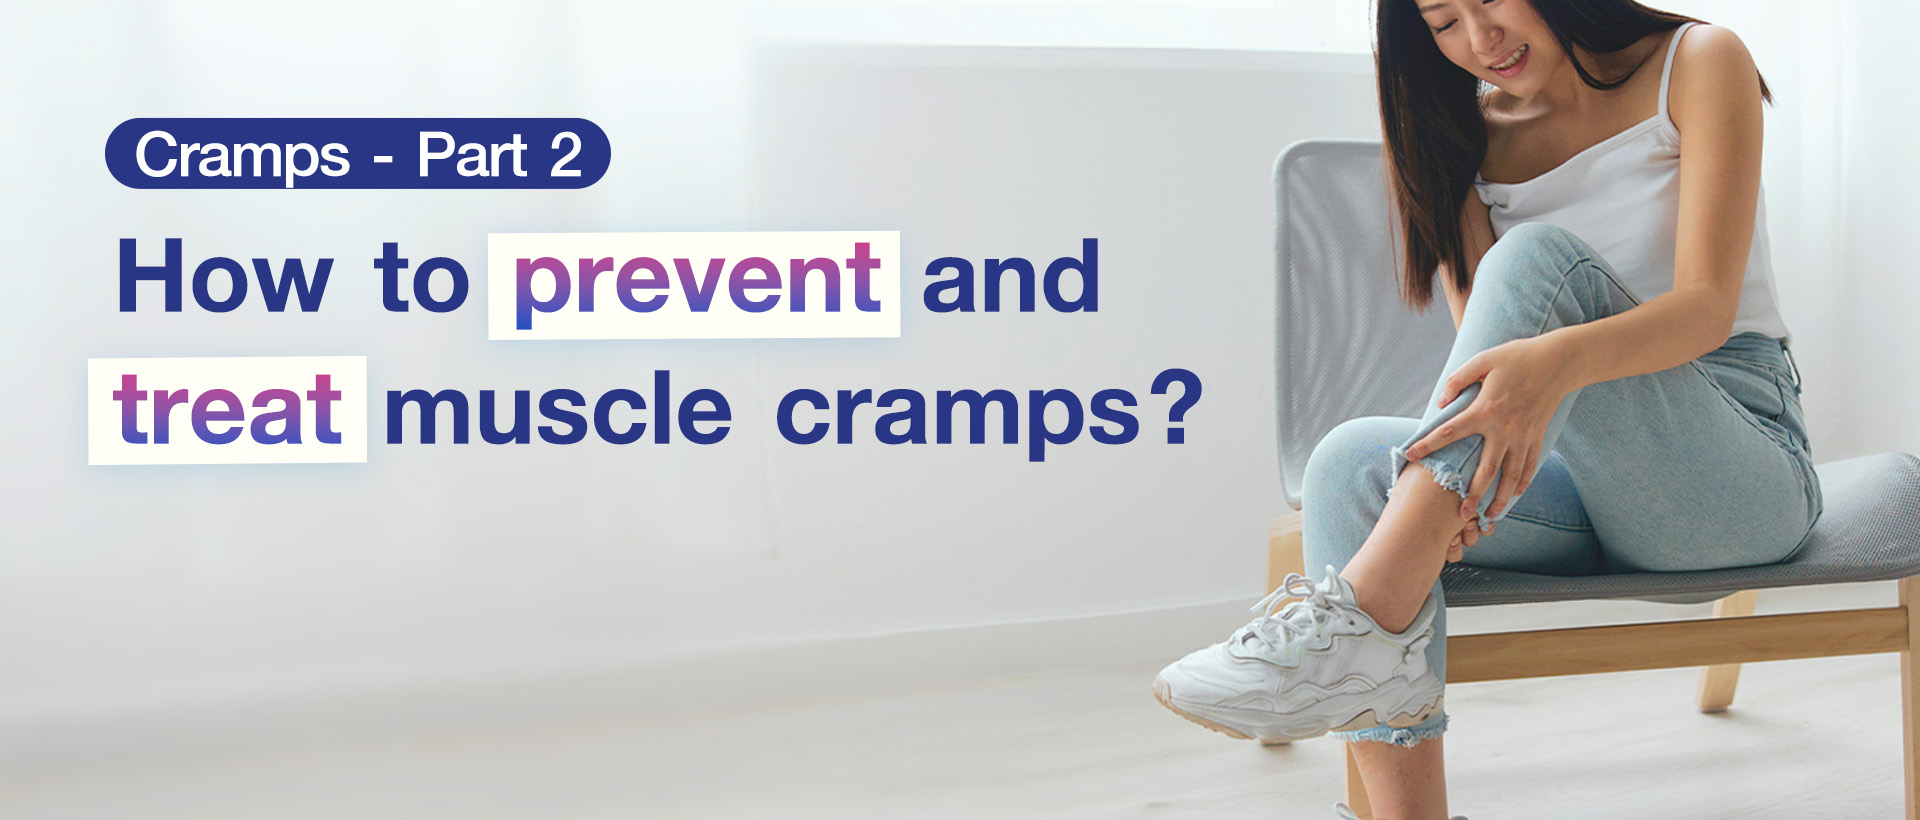 How to prevent and treat muscle cramps